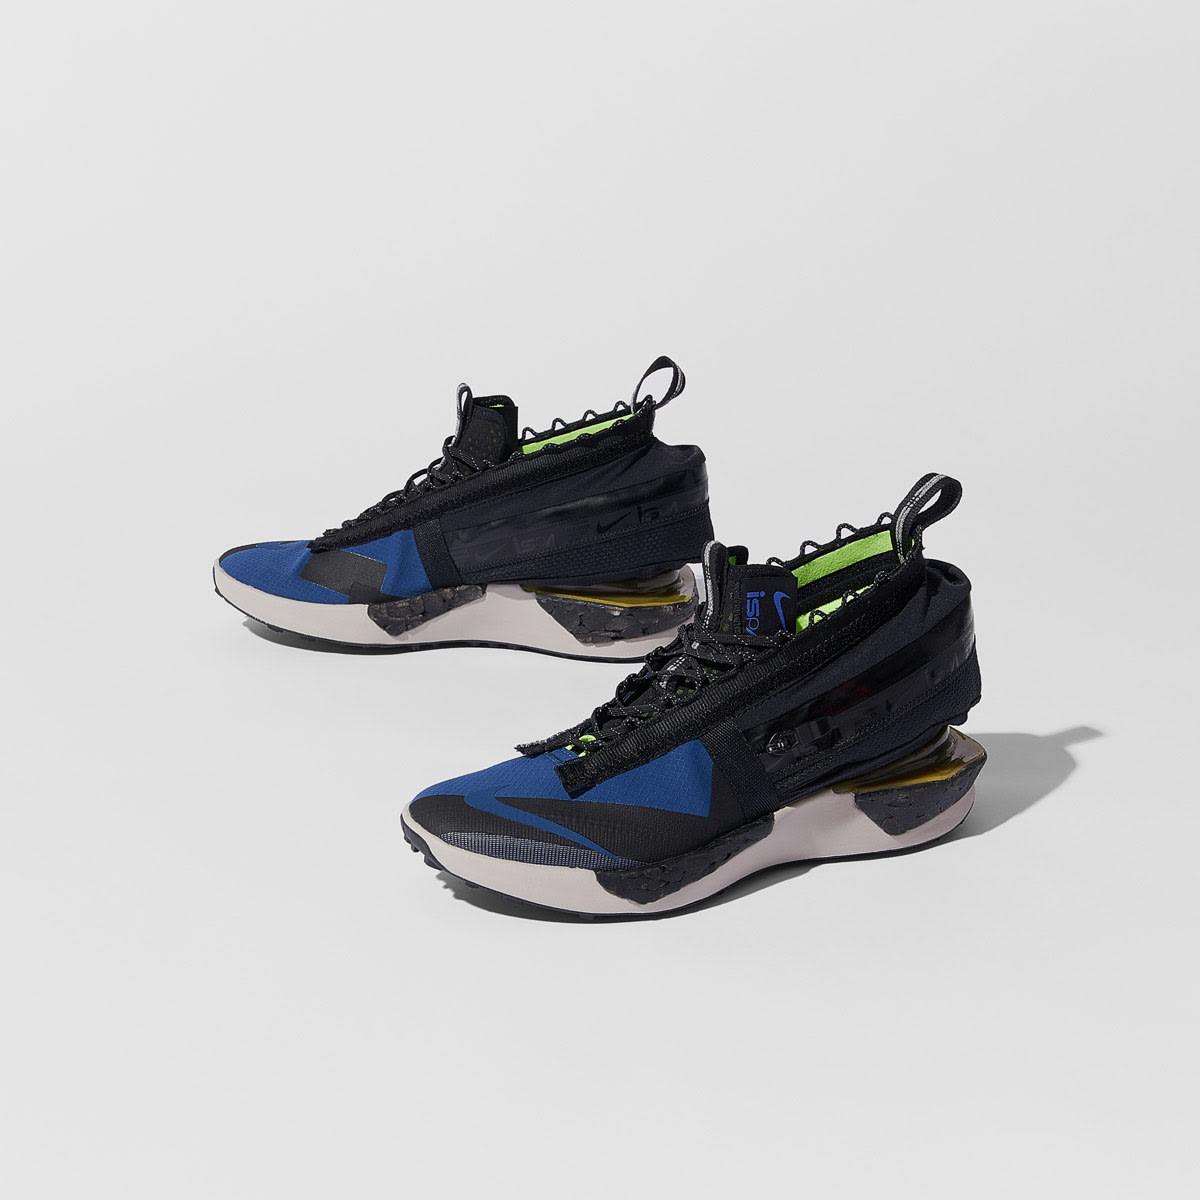 Nike ISPA Drifter Gator (Costal Blue) | END. Launches